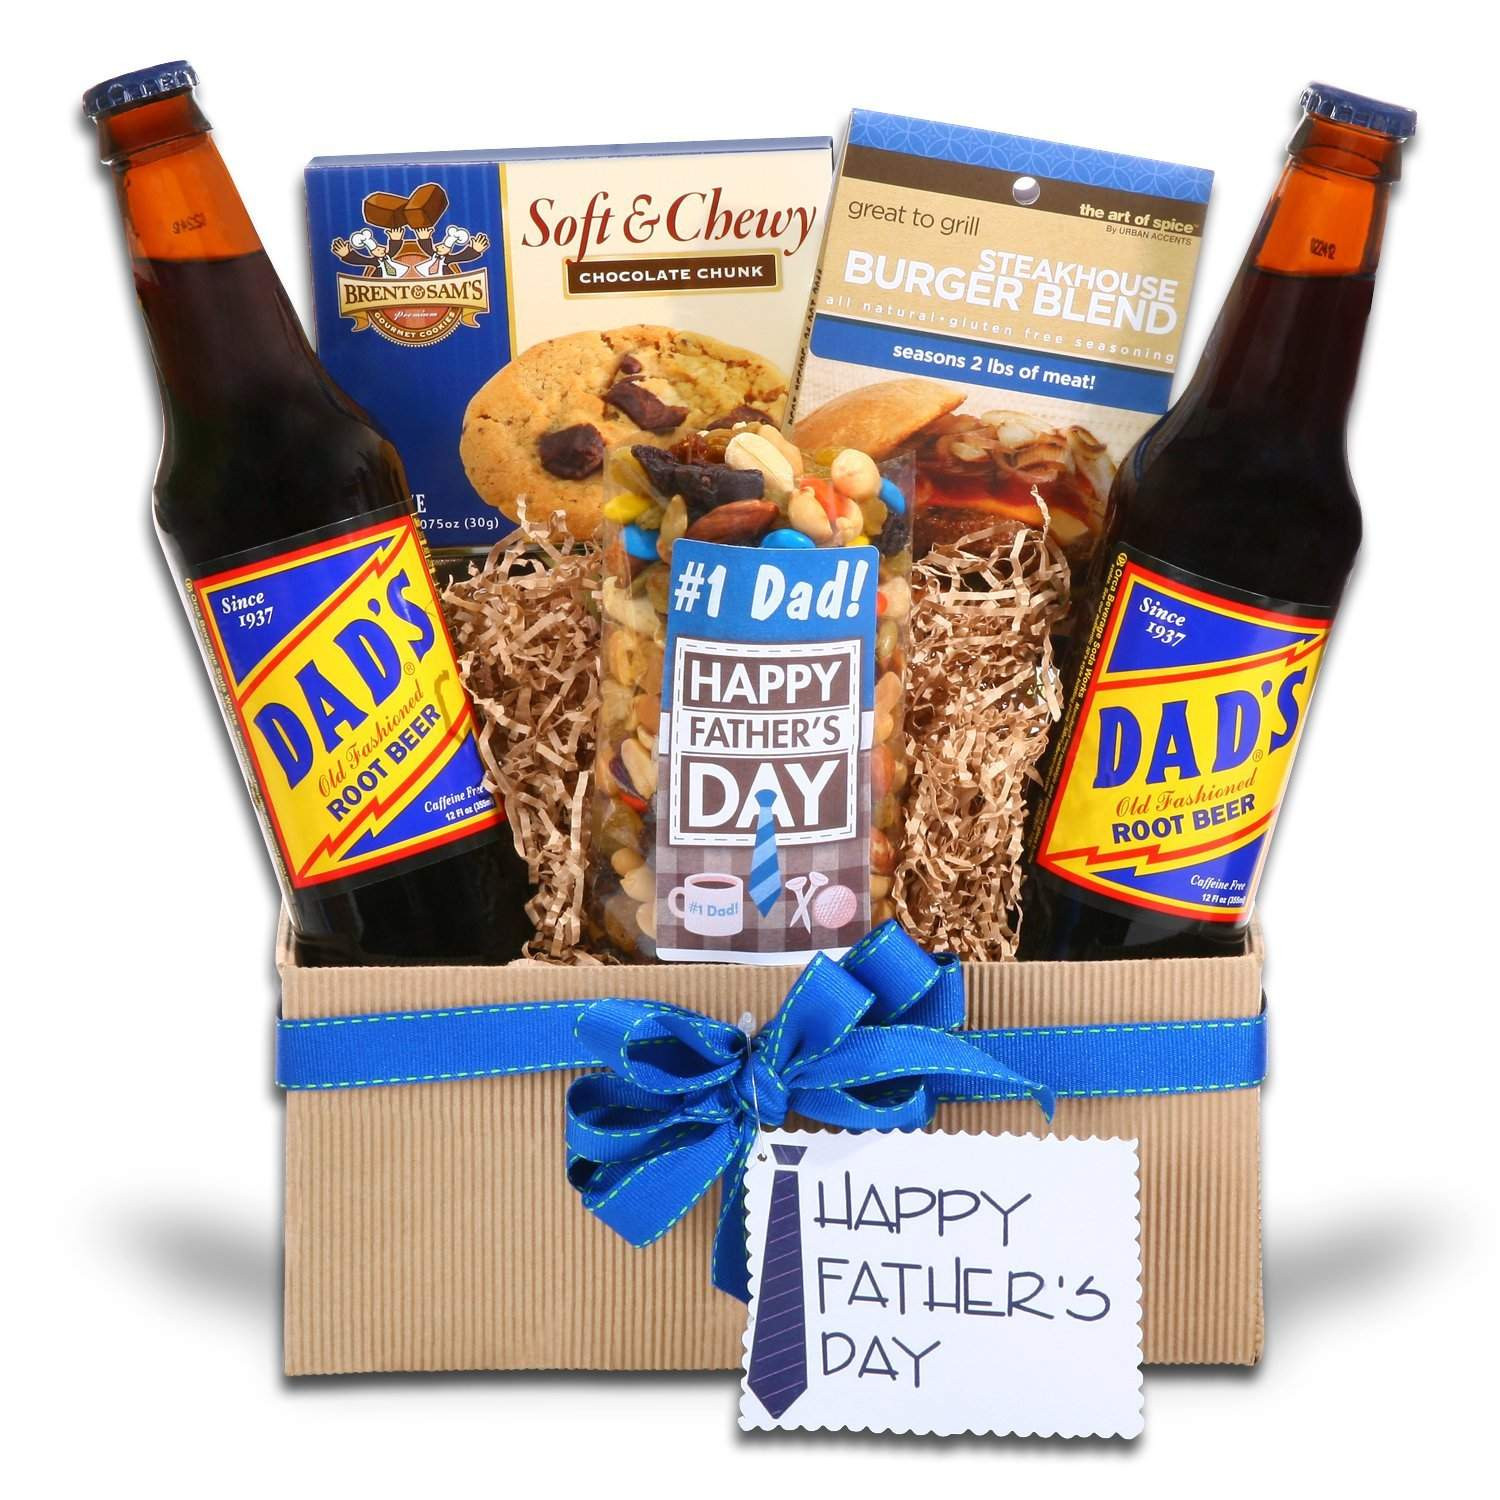 Fathers Day Gift Basket
 Top 20 Best Father’s Day Gifts The Heavy Power List